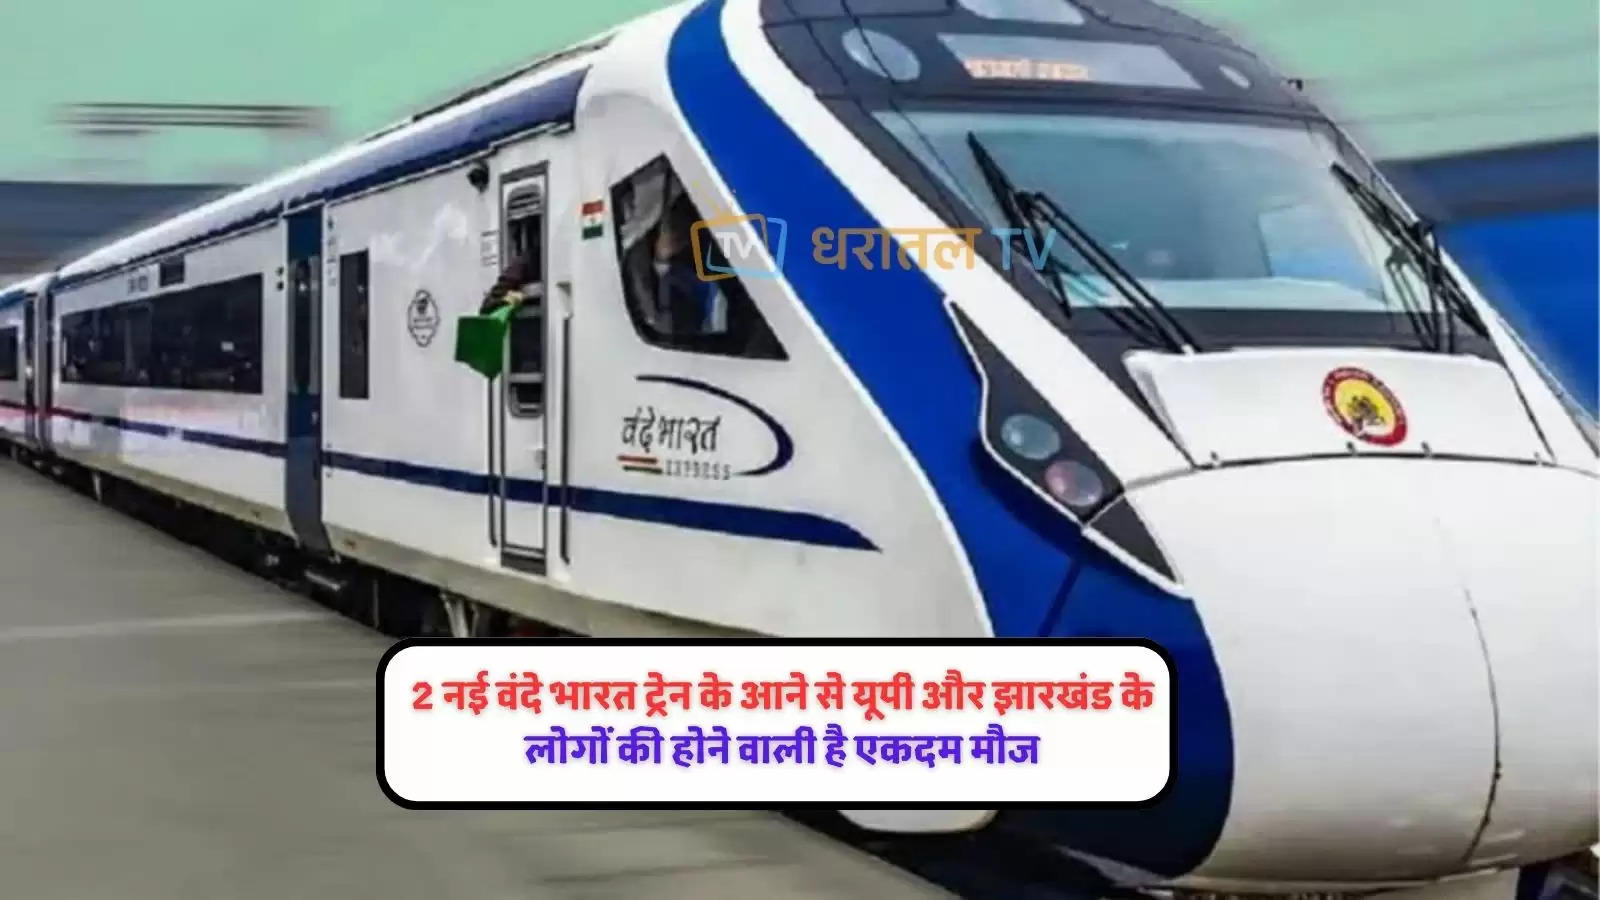 railways-up-and-jharkhand-likely-to-get-new-vande-bharat-express-train-lucknow-gorakhpur-ranchi-patna-check-r